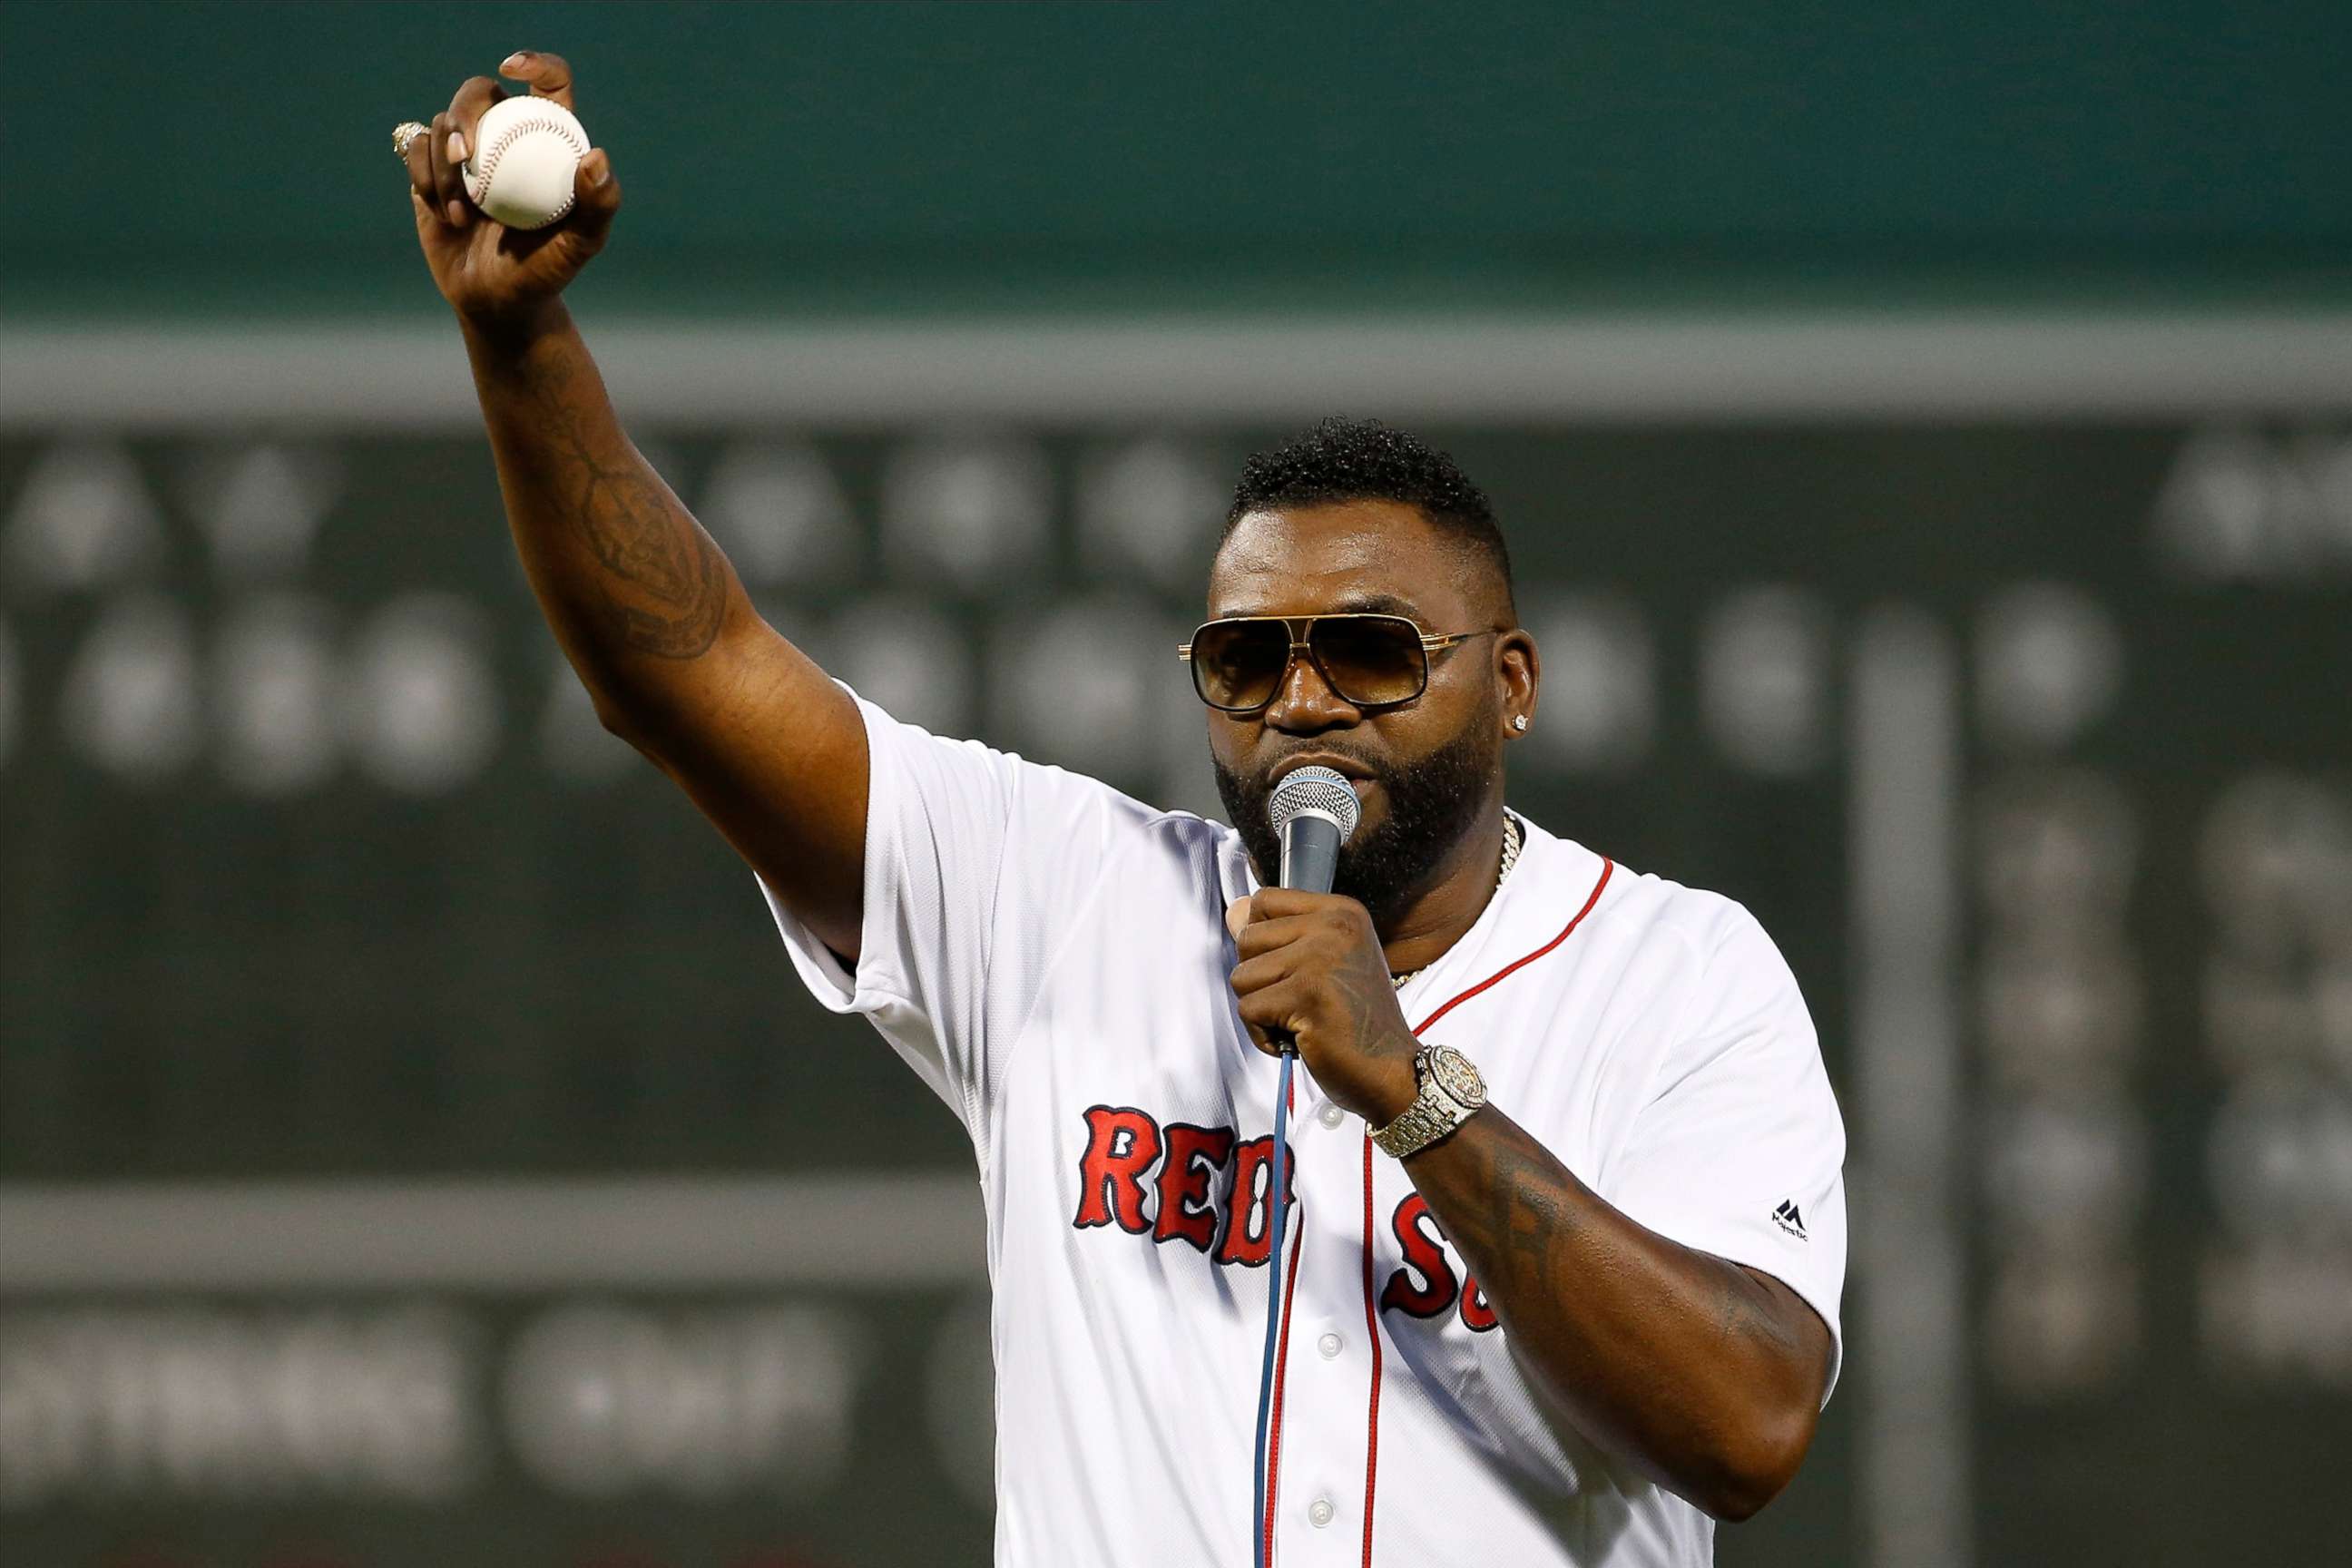 David Ortiz throws out first pitch at Fenway Park, surprises crowd 3 months  after he was shot - ABC News